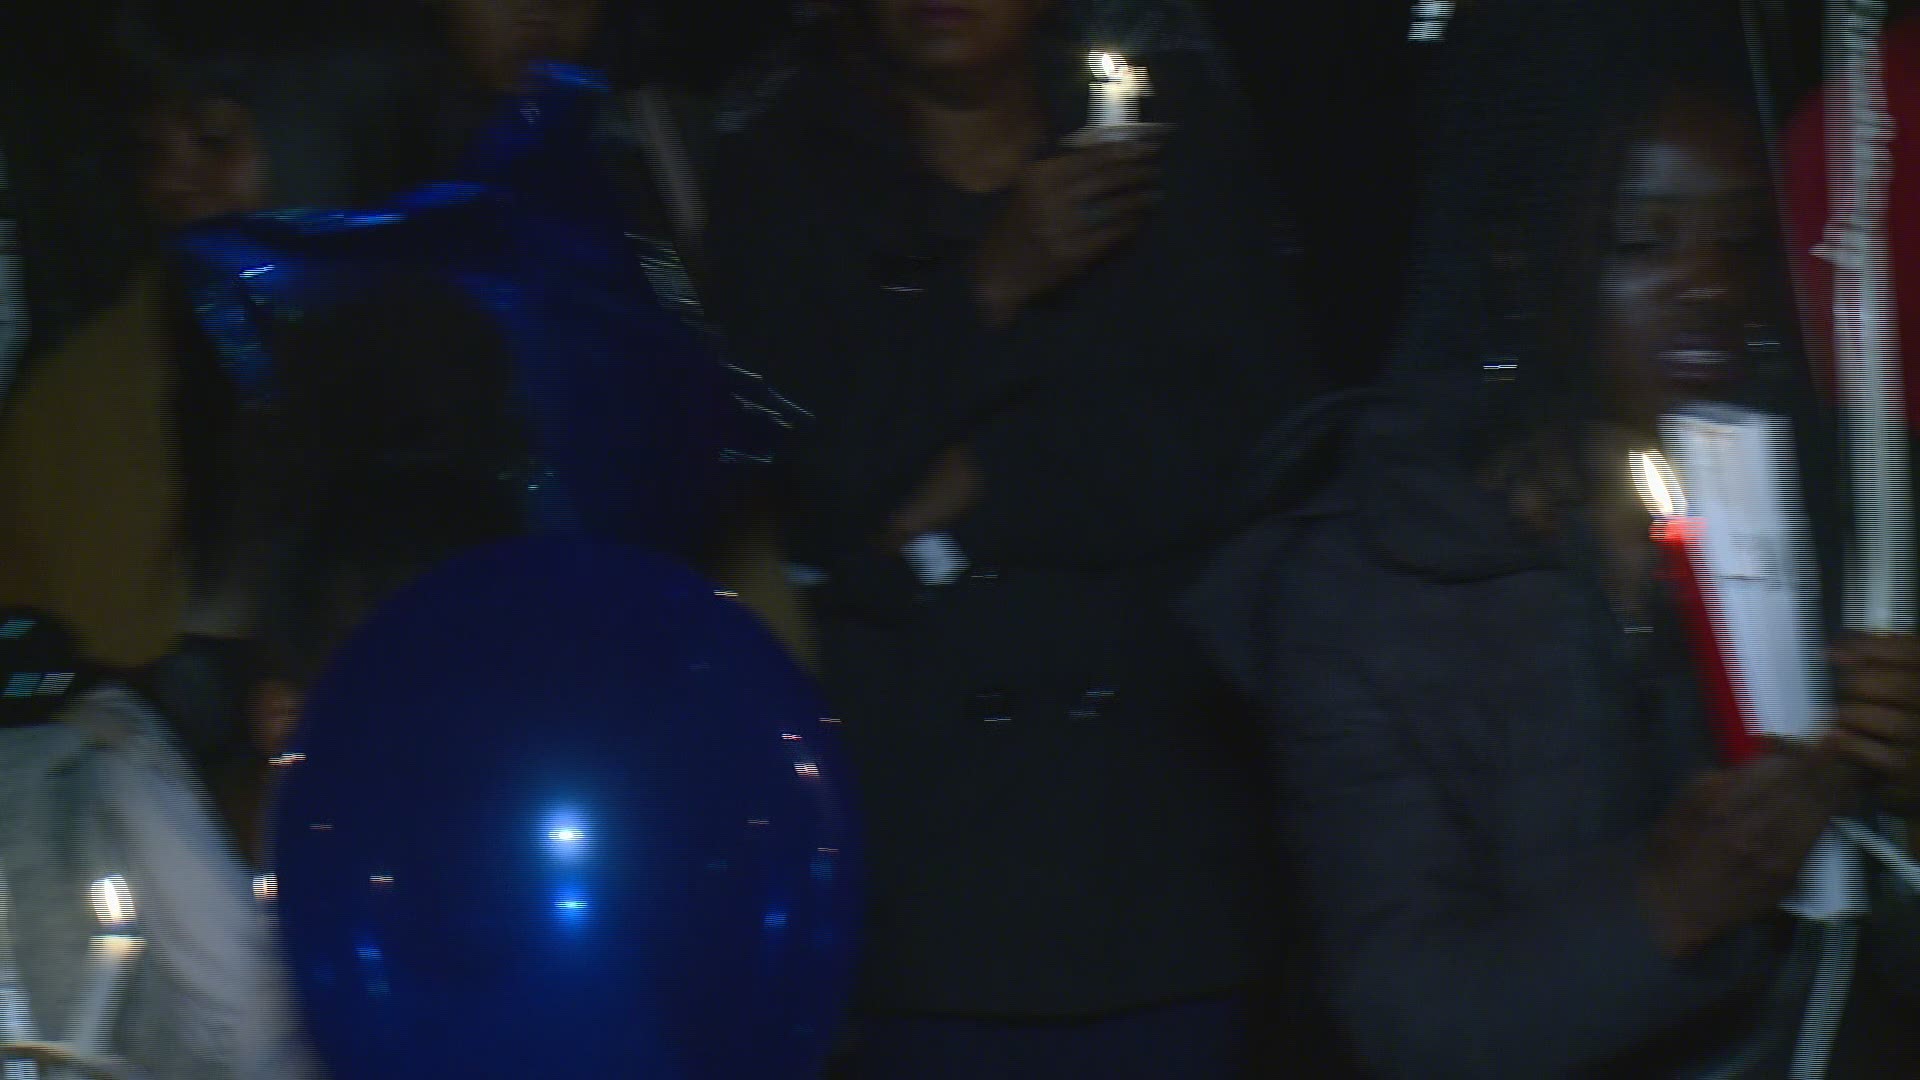 A vigil was held in honor of the violence interrupter who was shot earlier this week.